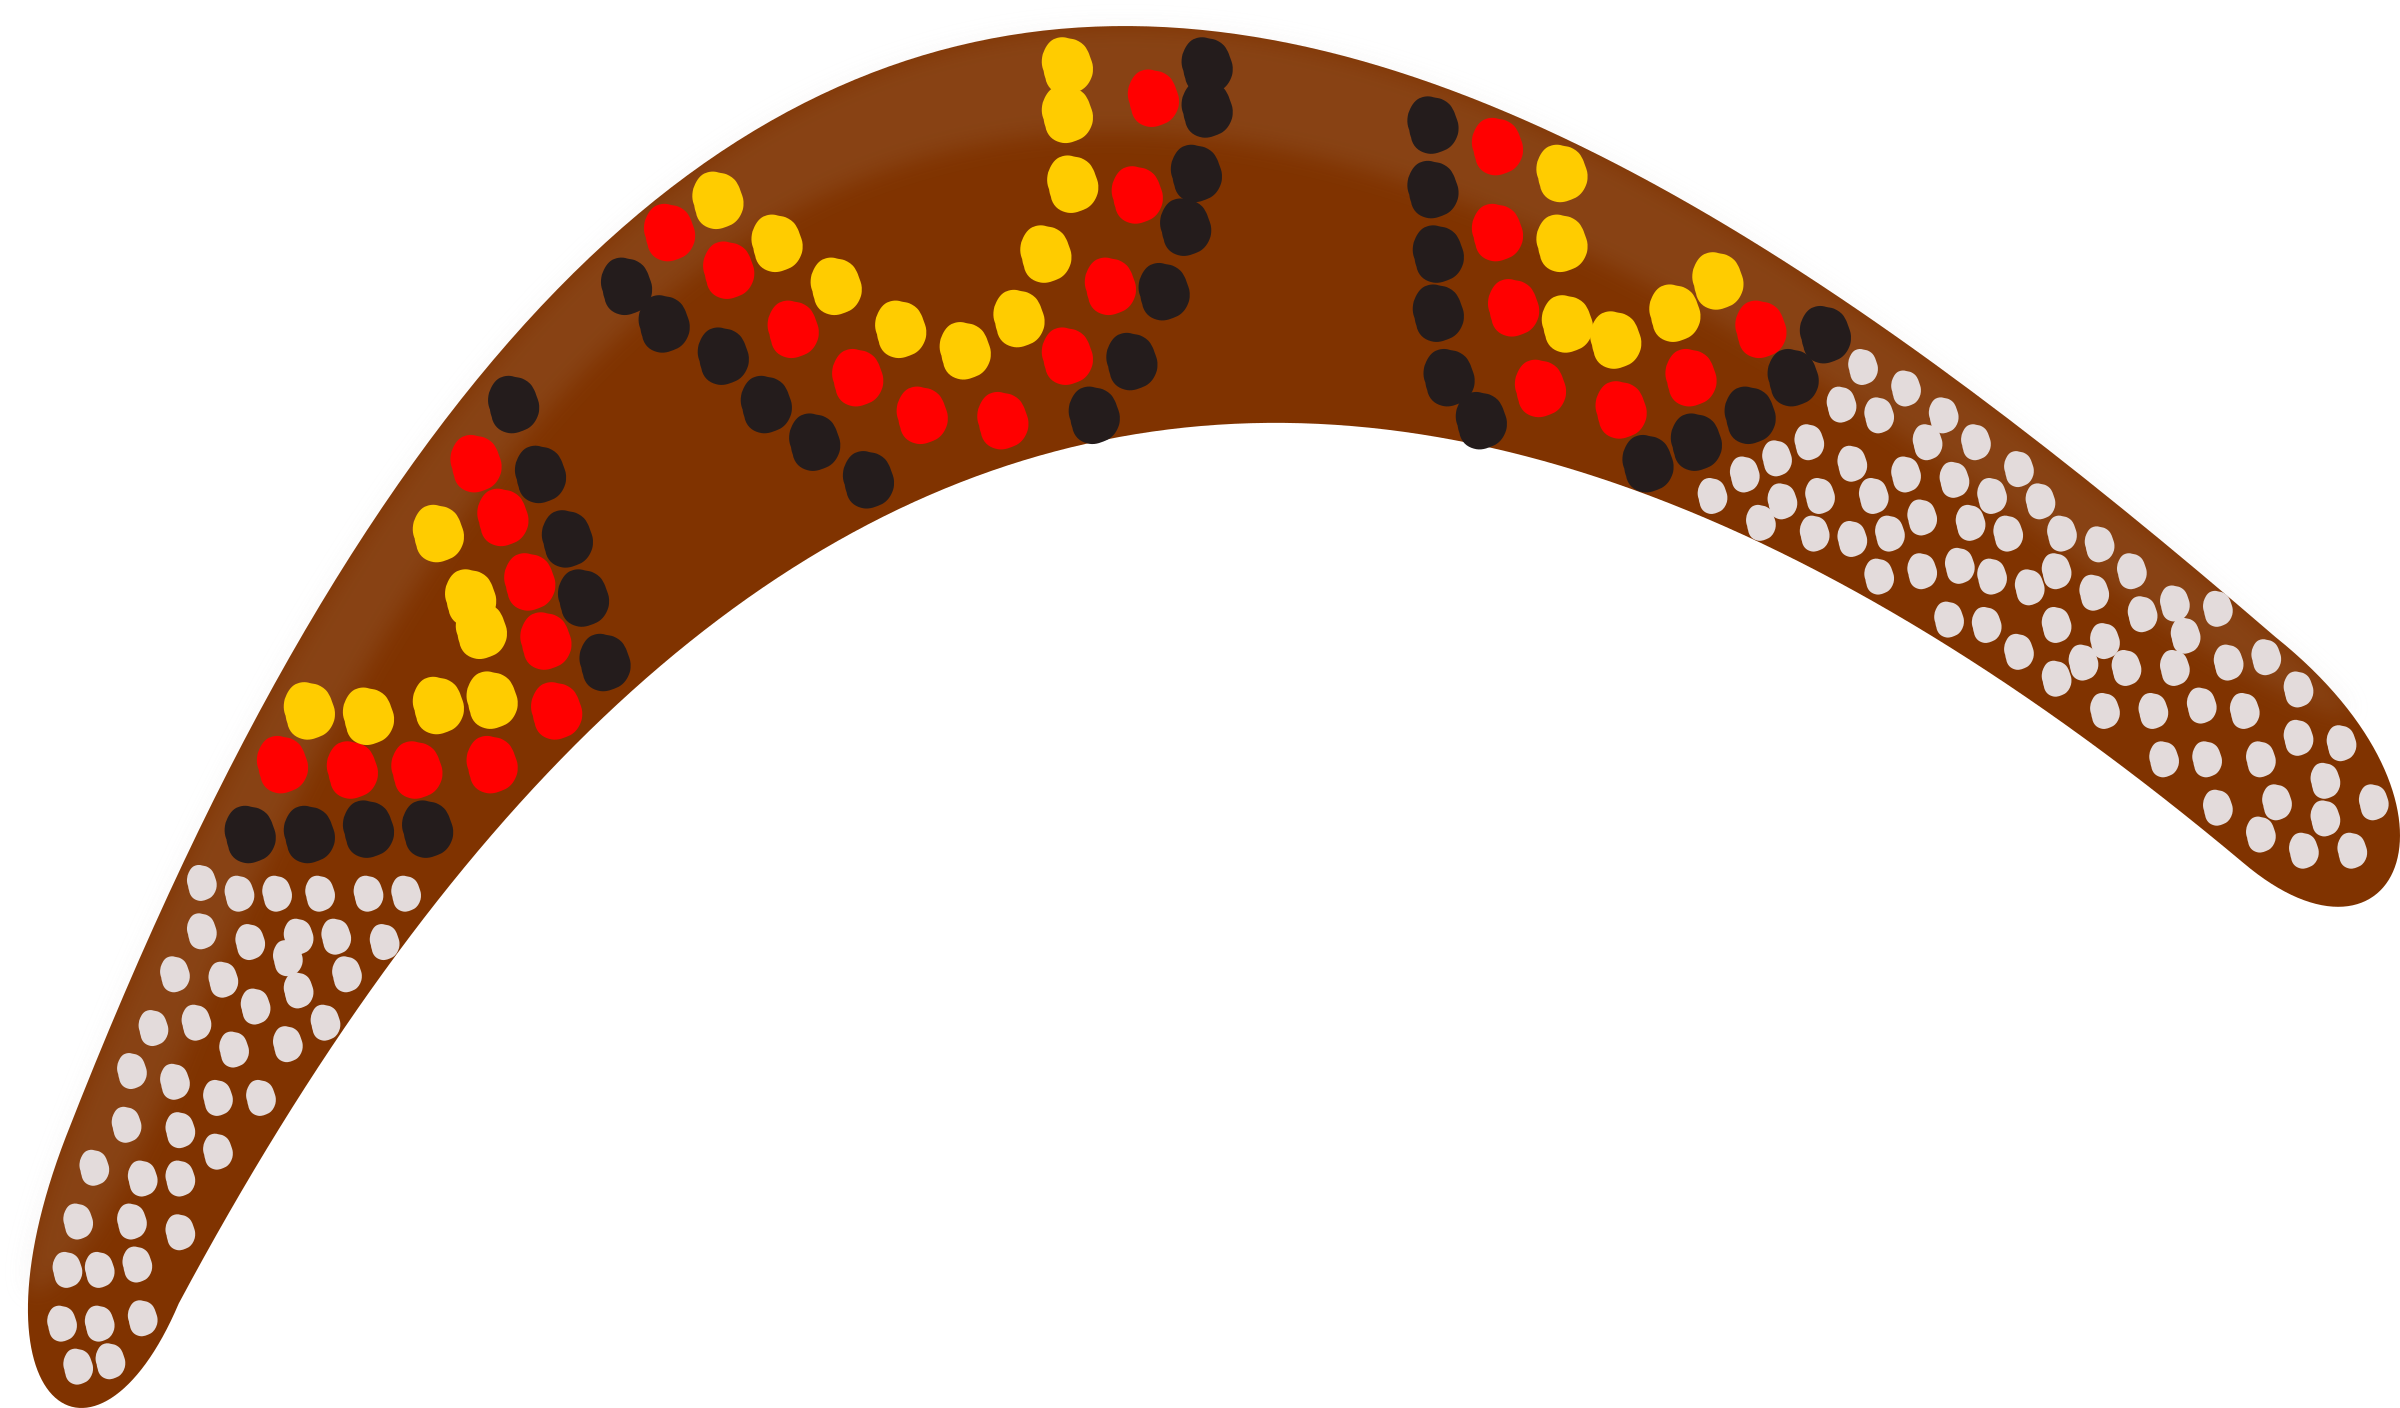 A Painted Boomerang With Colorful Dots